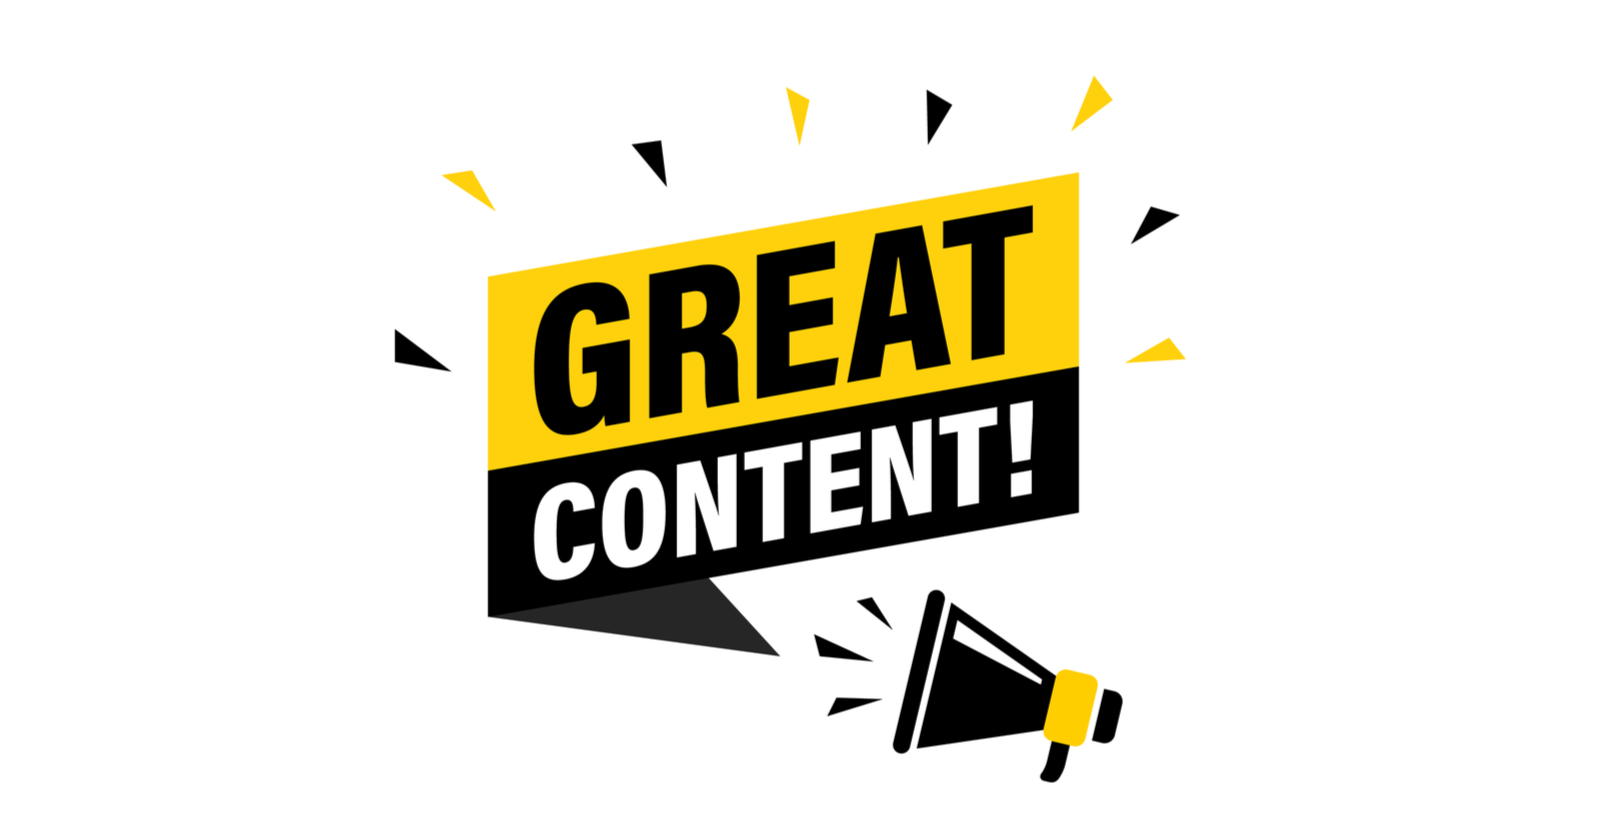 6 Standards of Content Greatness